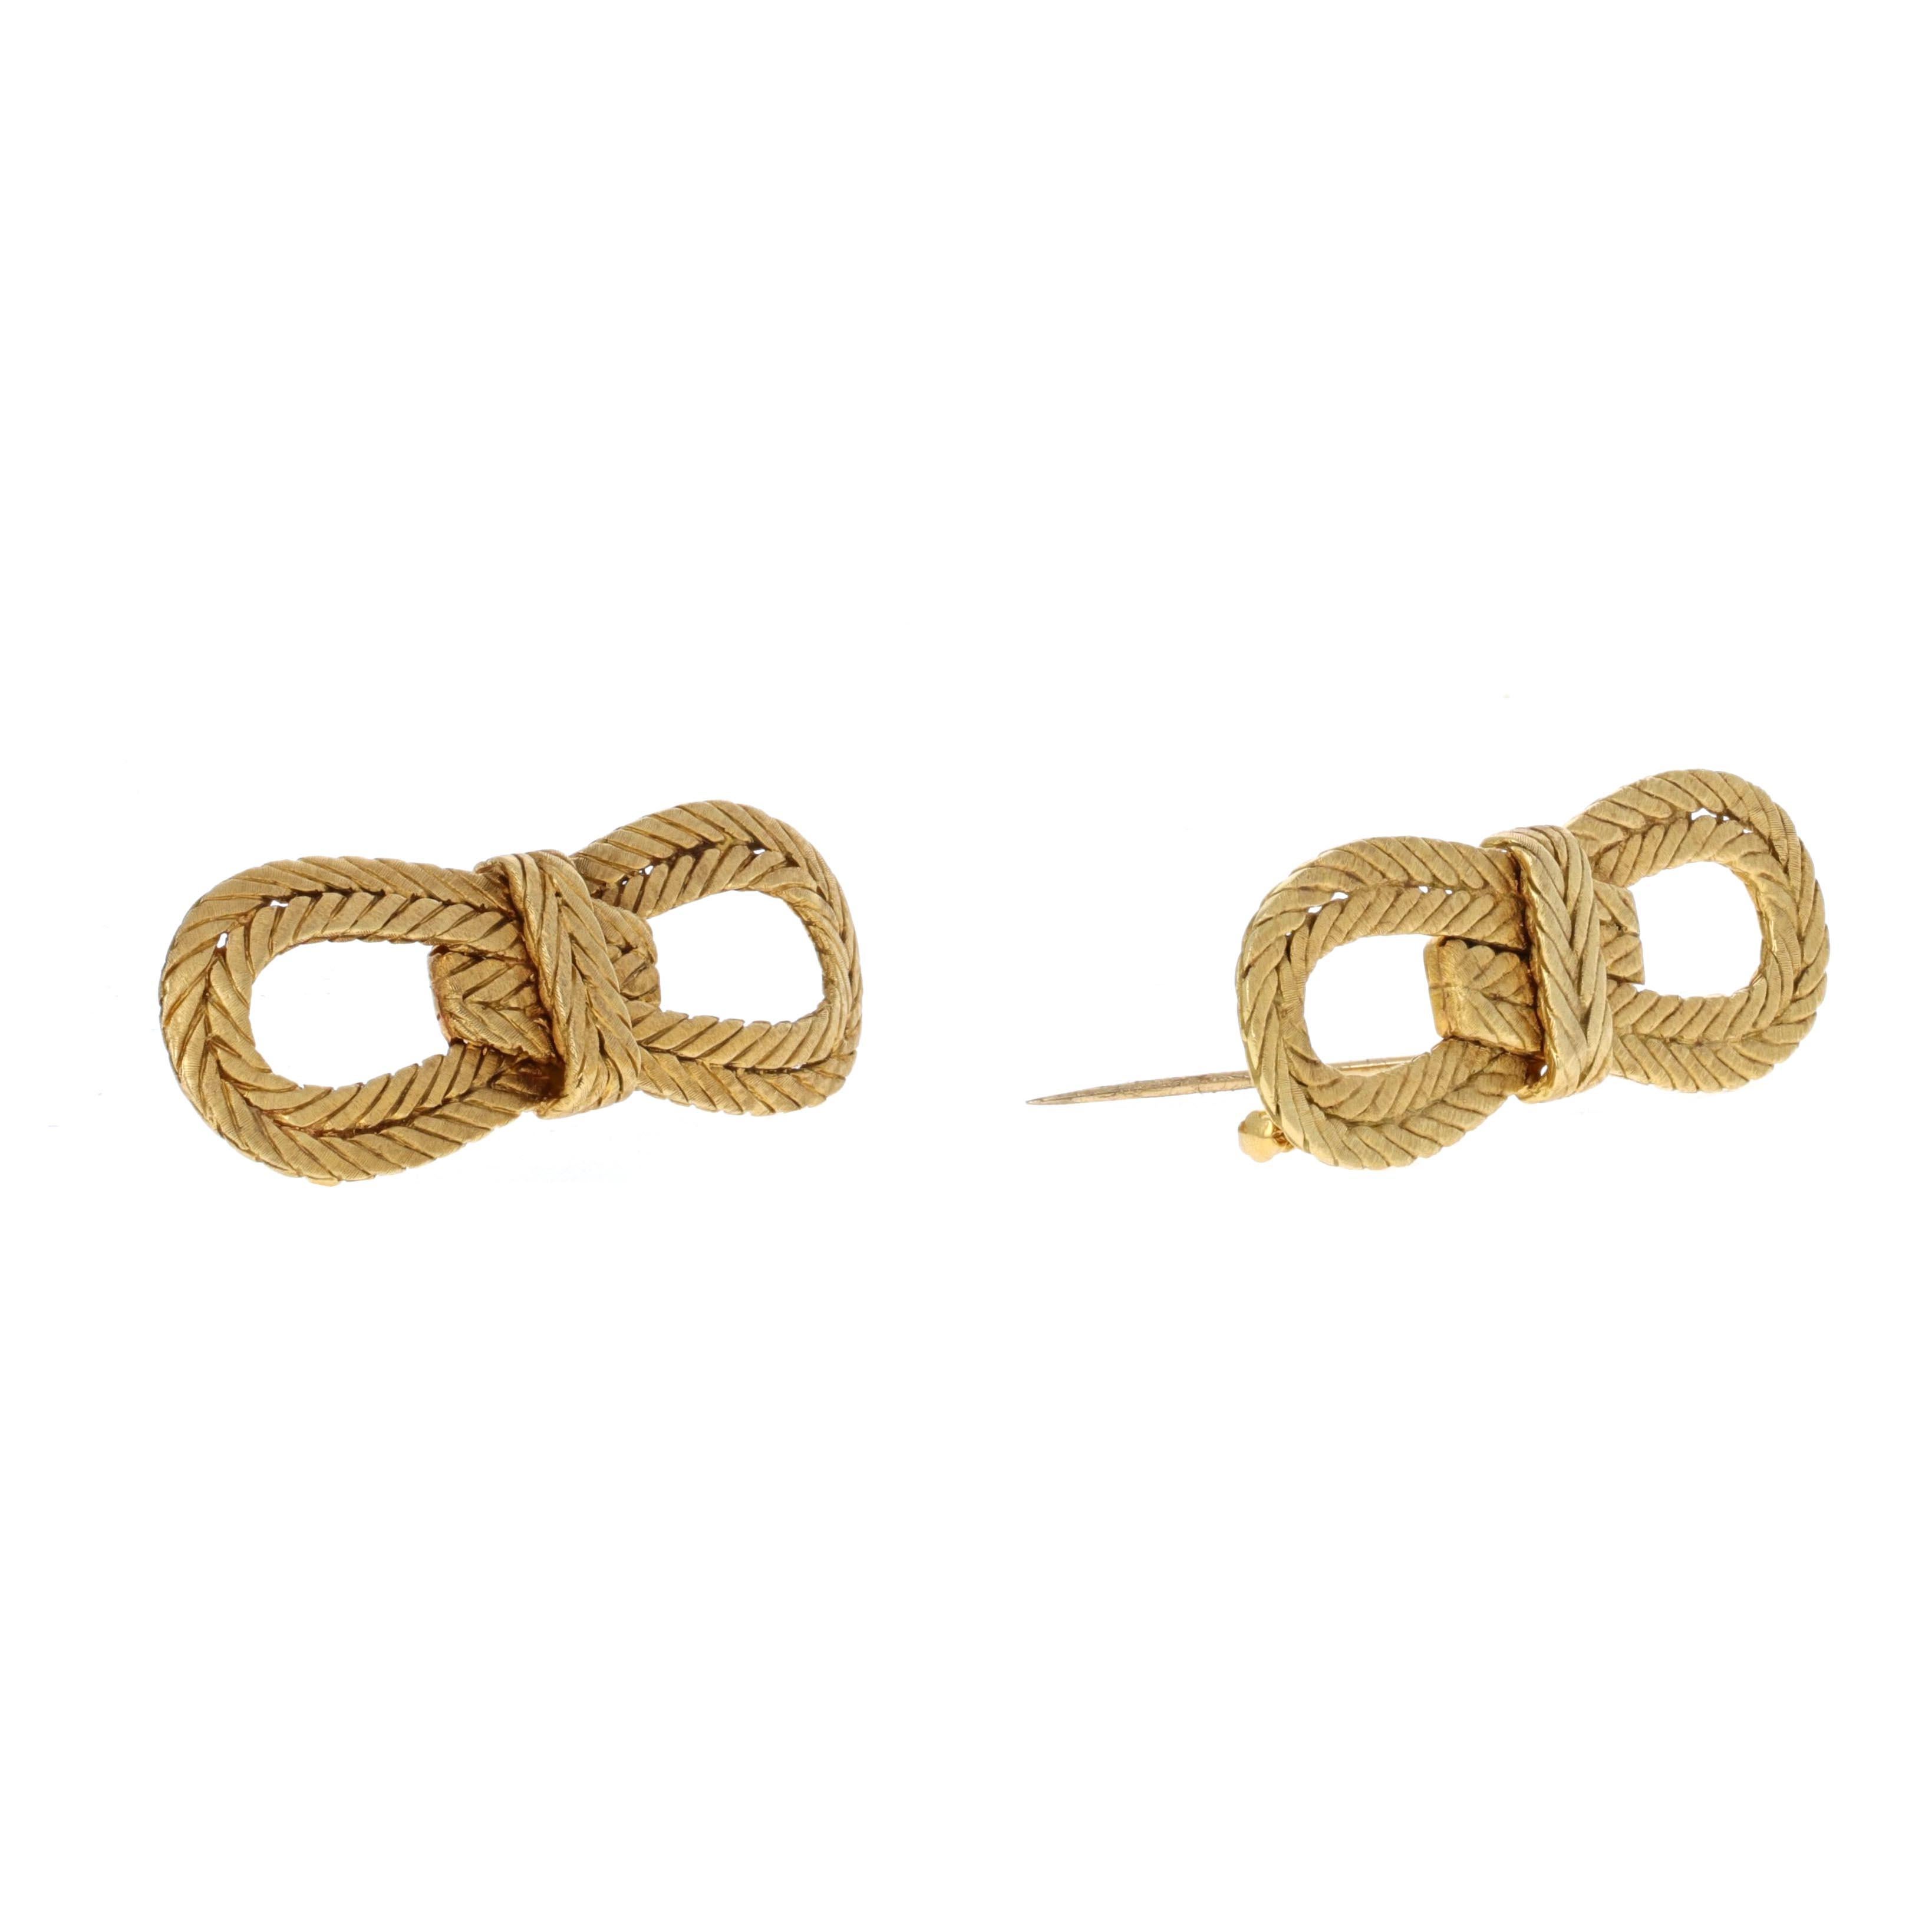 Vintage Buccellati, 18 karat yellow gold rope textured bow brooches. The two brooches are matching and sold as a set. The brooches are stamped Buccellati, Italy, 18 KT. They measure 53mm x 20mm and weigh 13.3 grams and 13.7 grams.

 They retailed